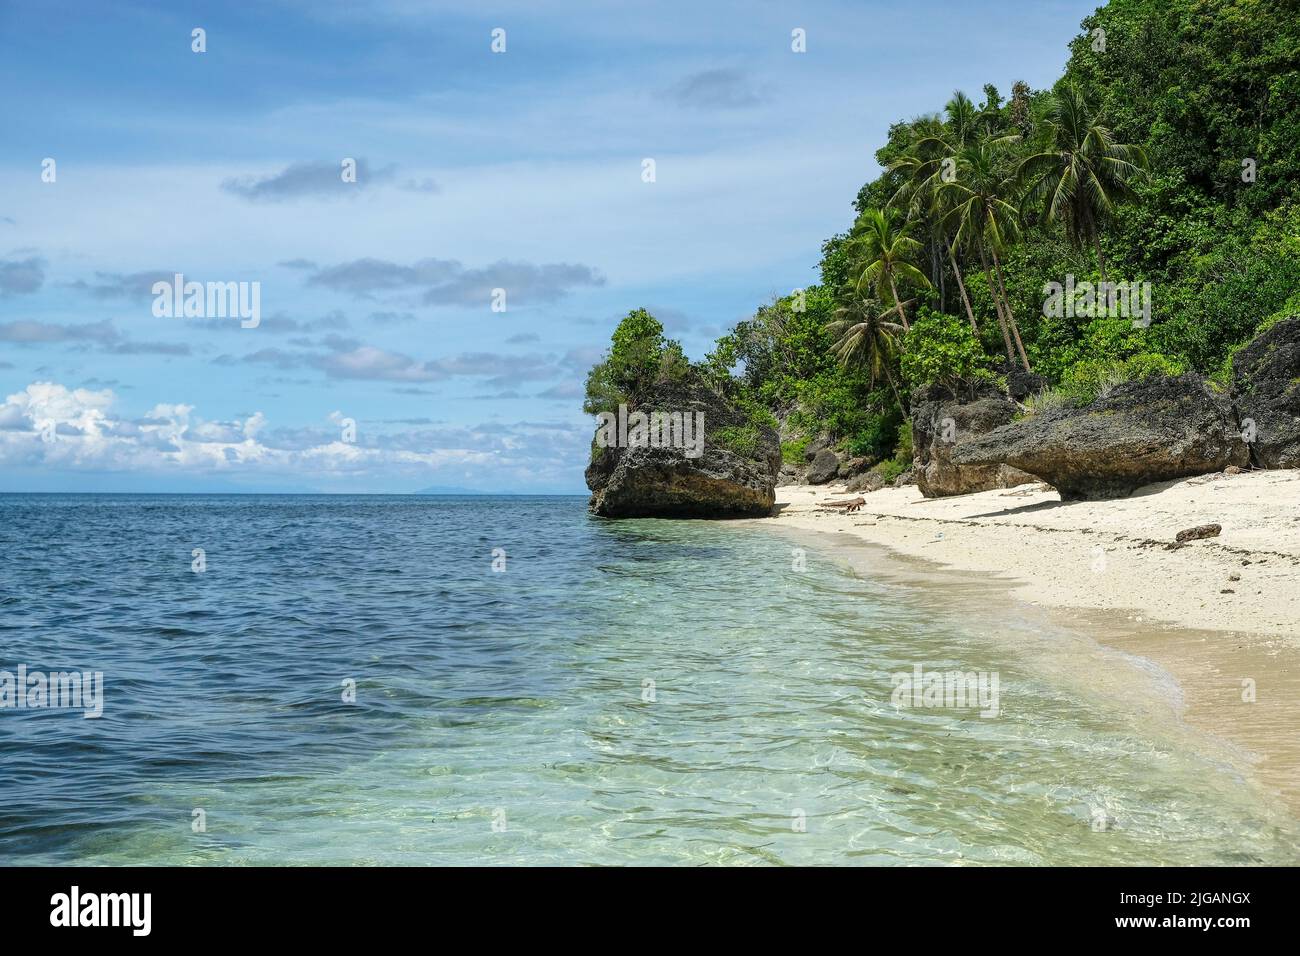 Views of Monkey Beach on Siquijor Island, located in the Central Visayas region of the Philippines. Stock Photo